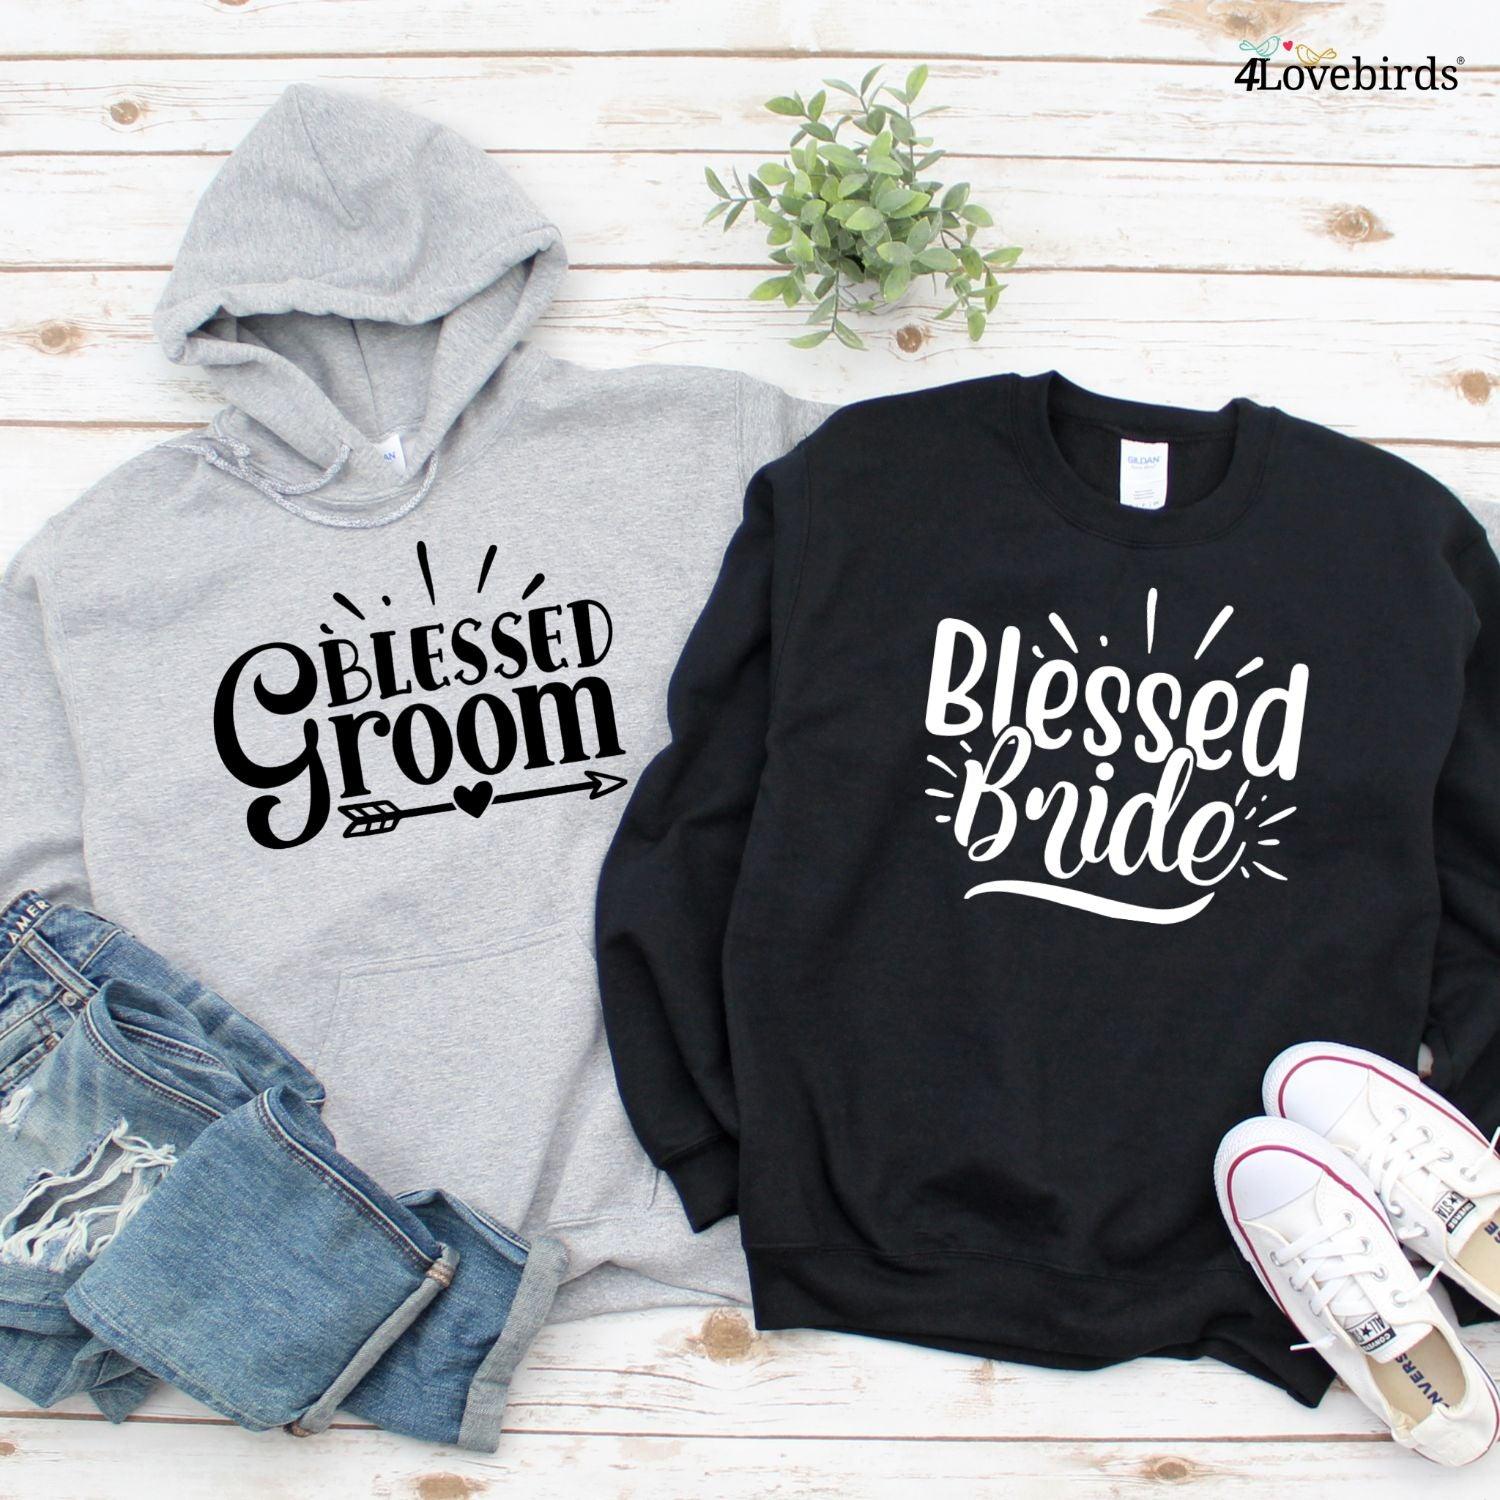 Blessed Bride & Groom Matched Set - Perfect as Engagement Announcements or Honeymoon Outfits! - 4Lovebirds